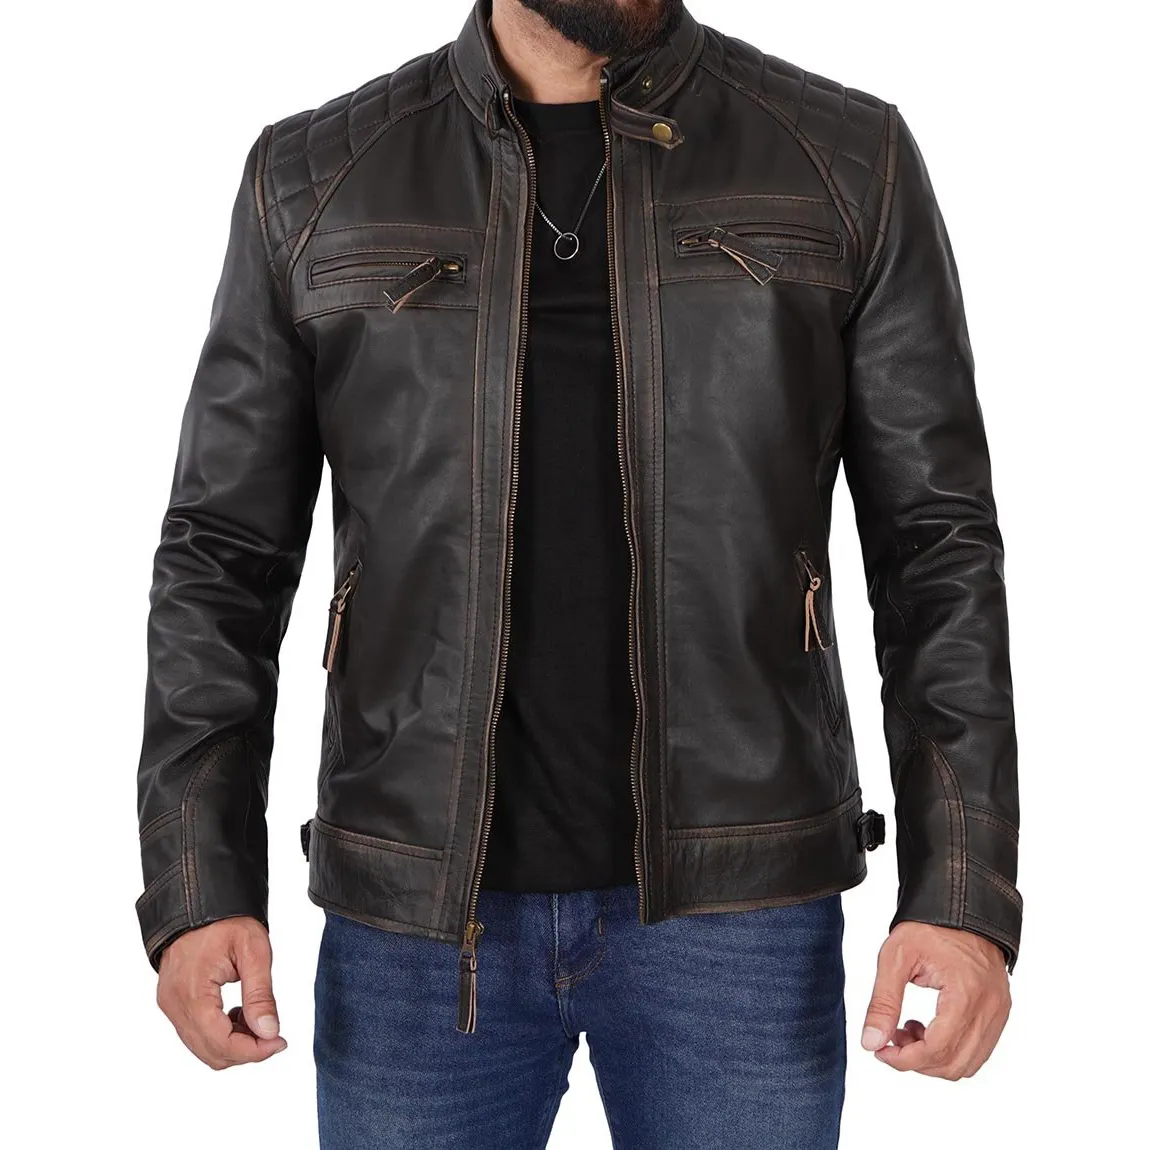 Men Clothing Best Design Sheep Skin Causal Wear Men Leather Jacket With Front Zipper Cheap Price High Quality Jacket